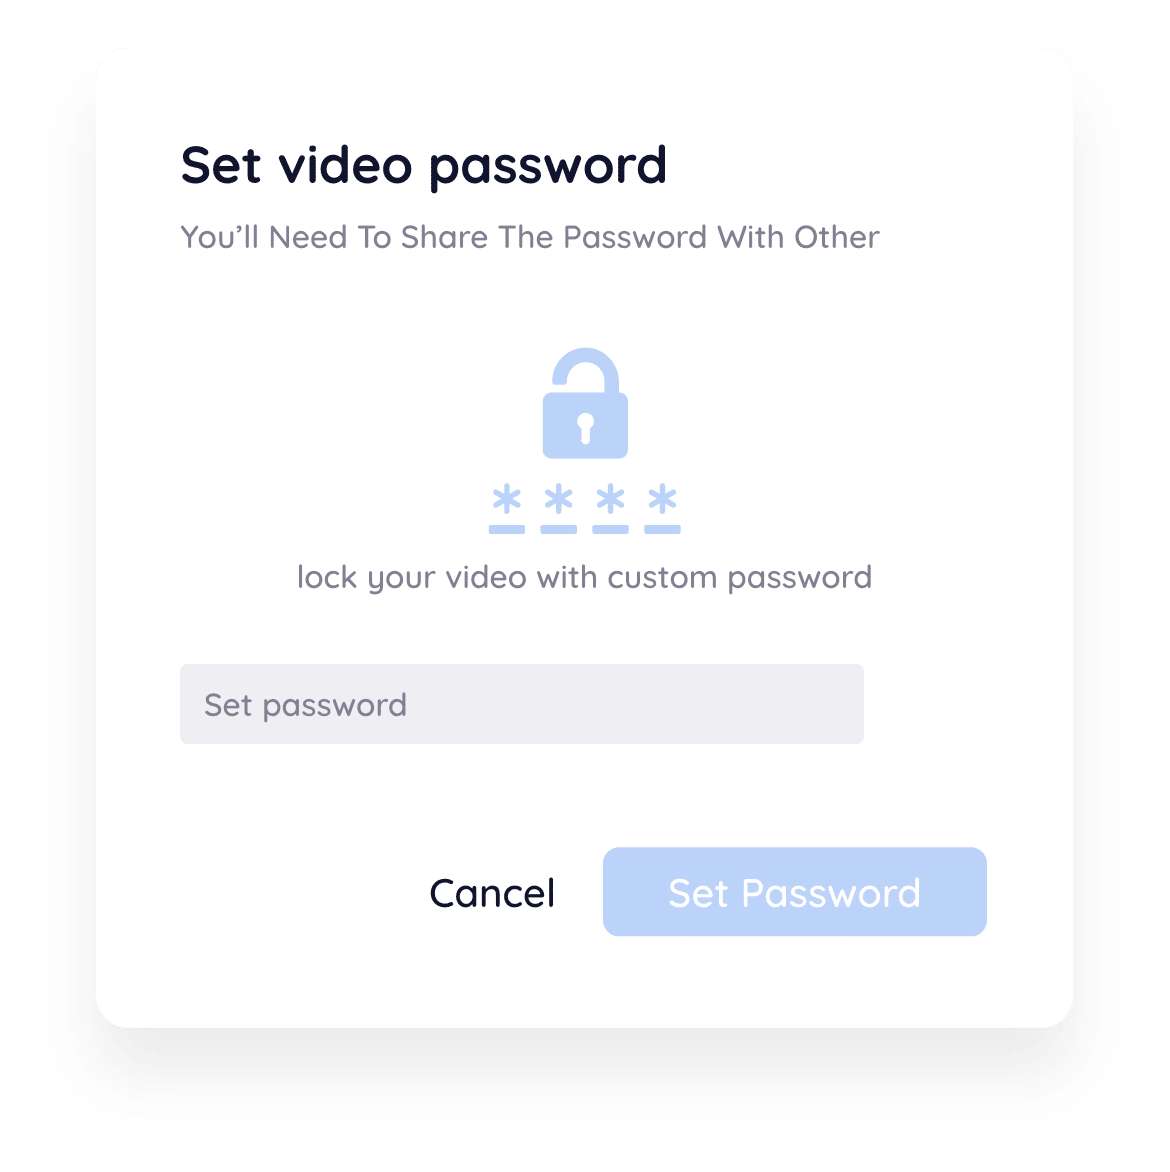 Password Based Access to Videos - Host Securely